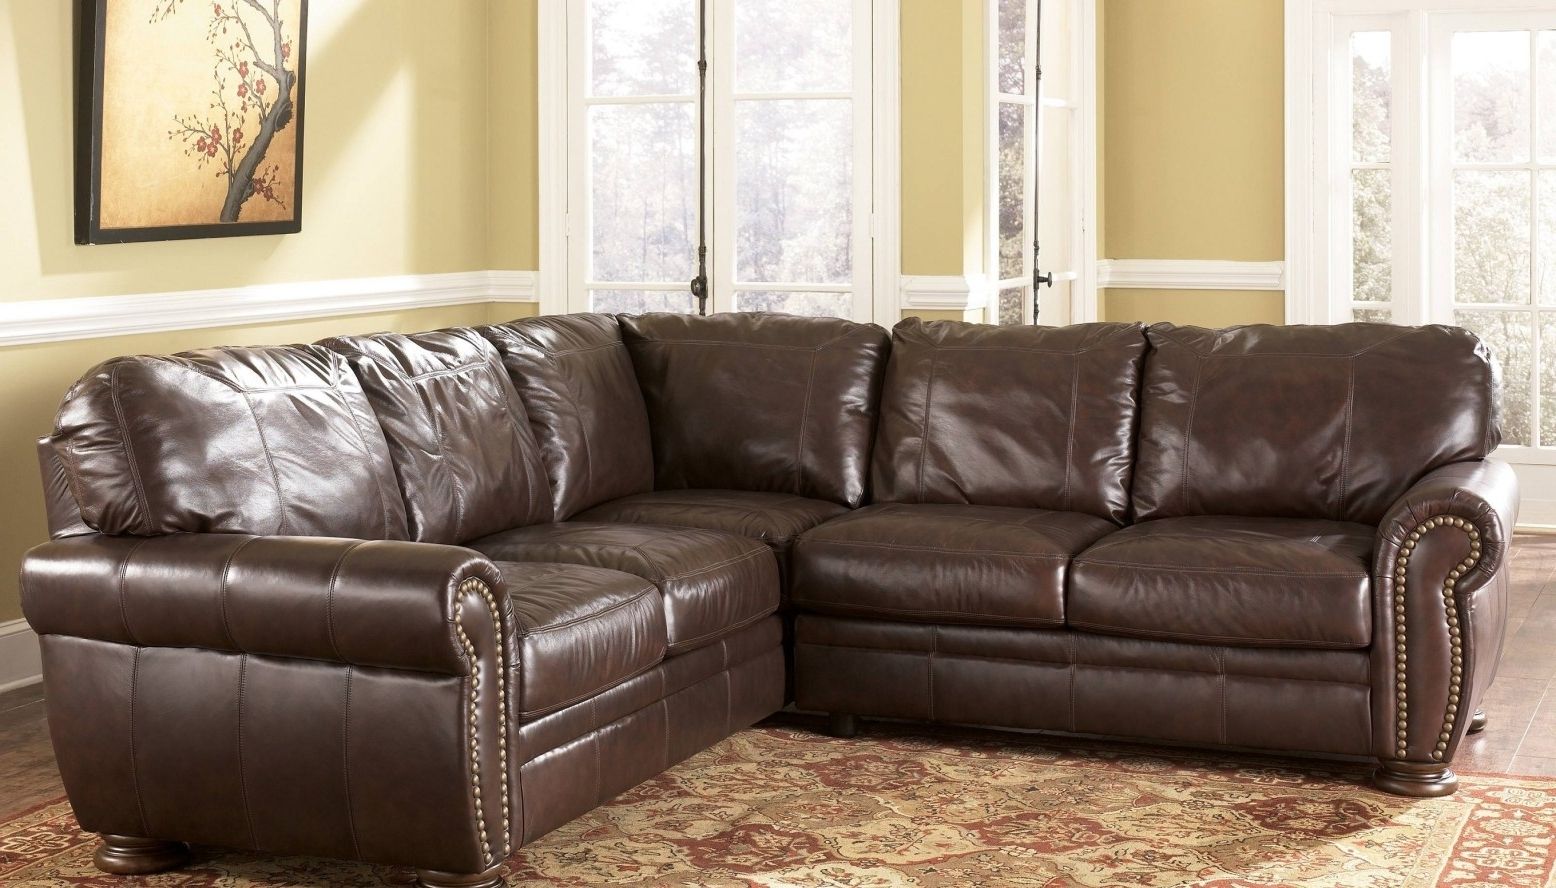 Sectional Sofas Tampa Fl Pertaining To Most Popular Tampa Fl Sectional Sofas (View 6 of 15)